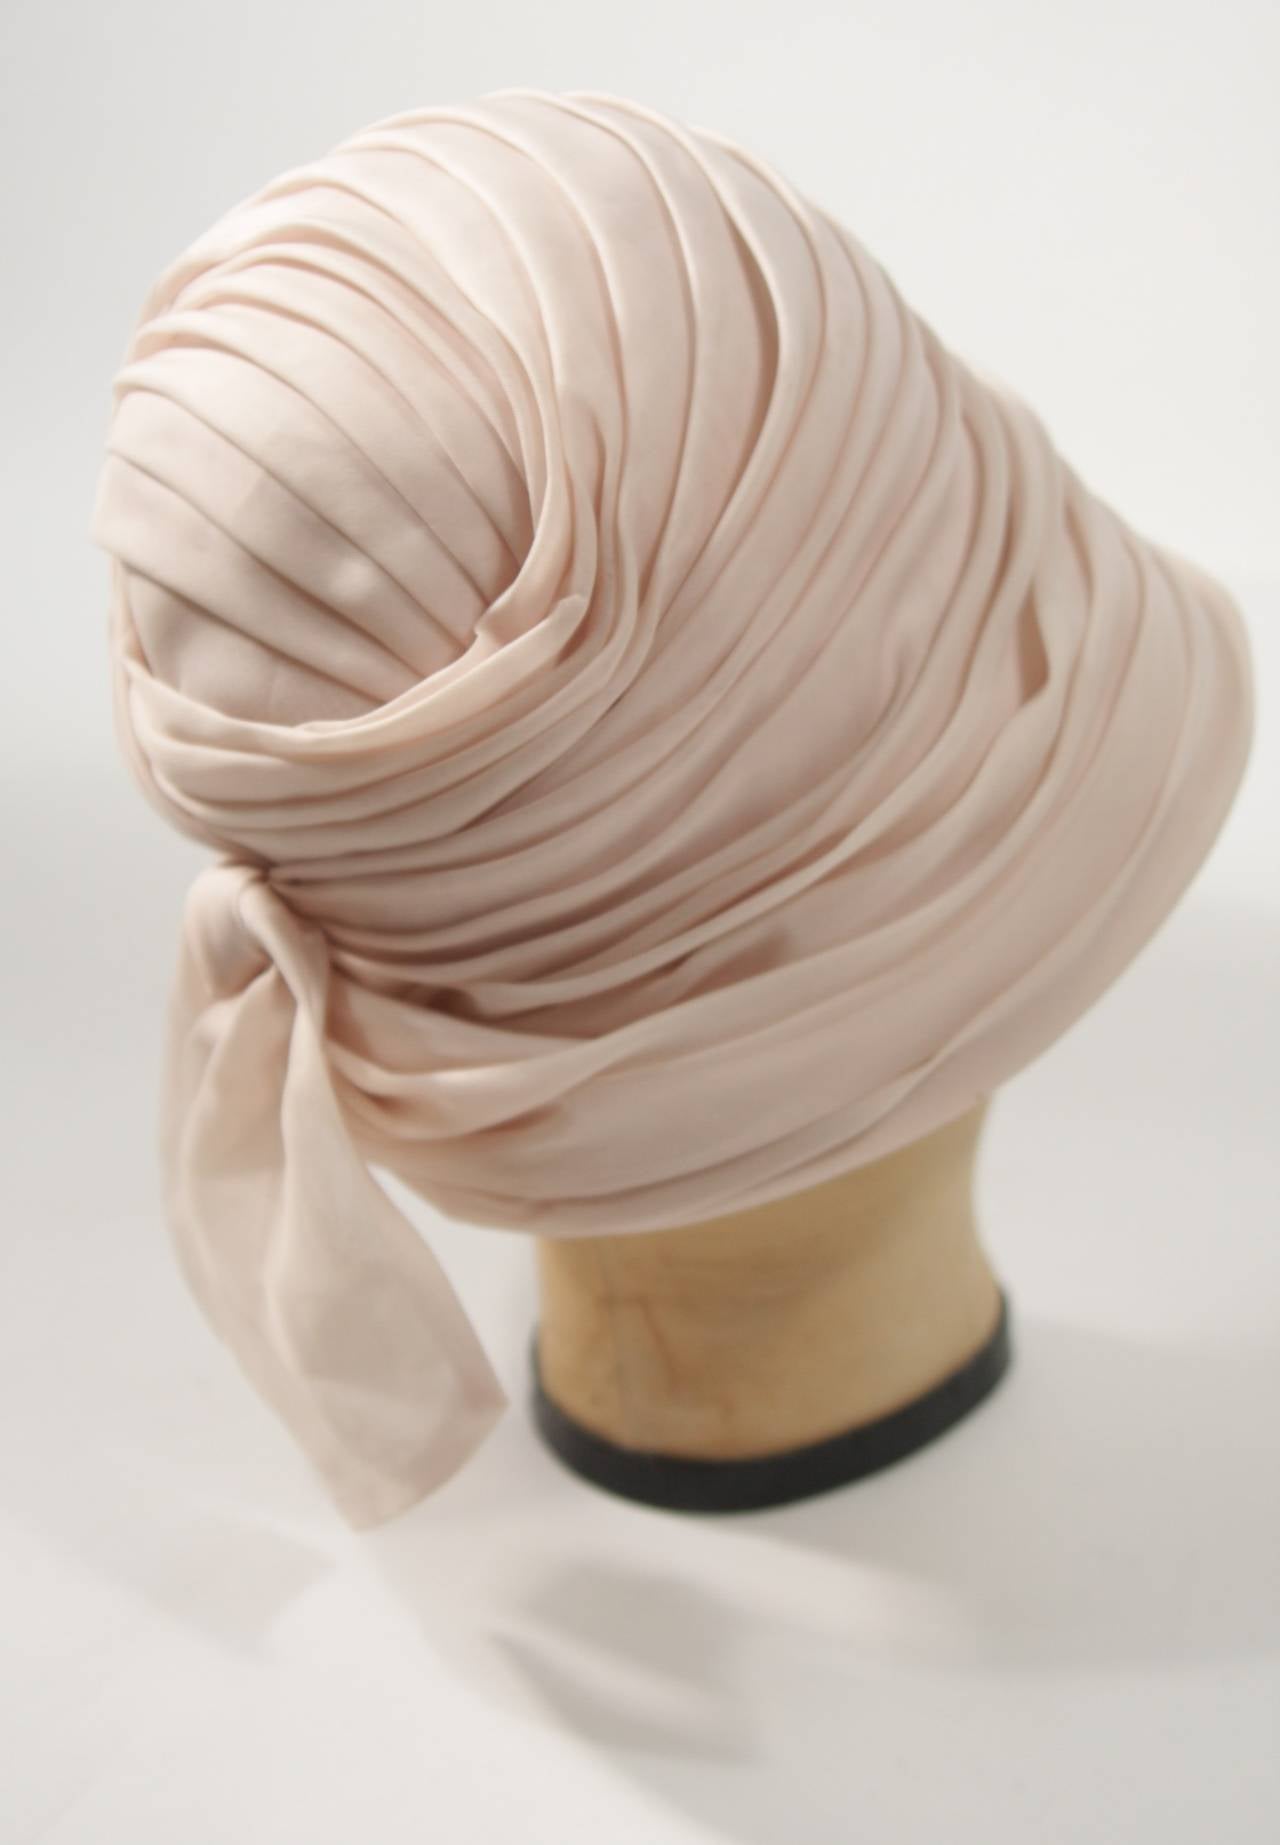 This Christian Dior hat is composed of a wonderful peach hued cream. Features a pleated and gathered design with a bow accent. Made in France. 

Measures (Approximately)
Circumference: 20